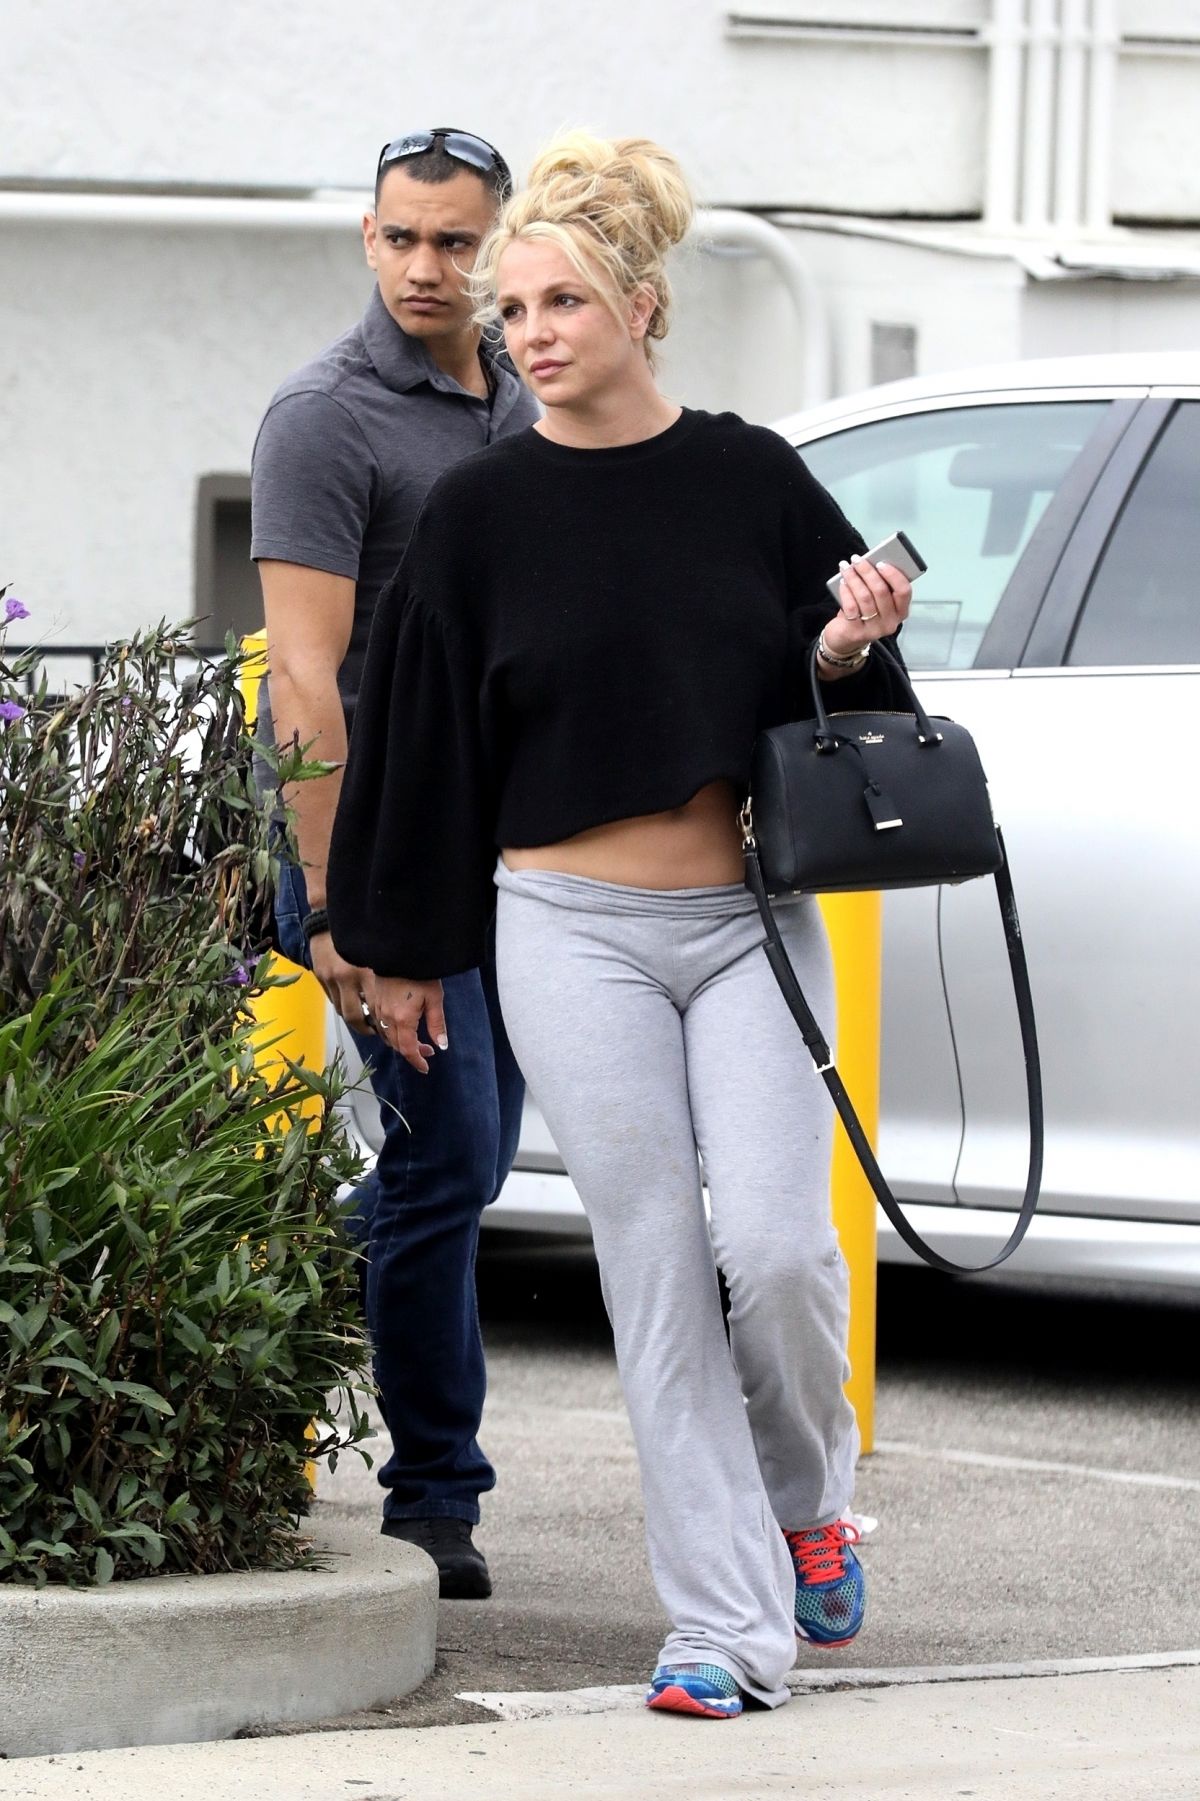 Britney Spears >> preparando nuevo álbum - Página 30 Britney-spears-out-and-about-in-thousand-oaks-04-26-2019-8